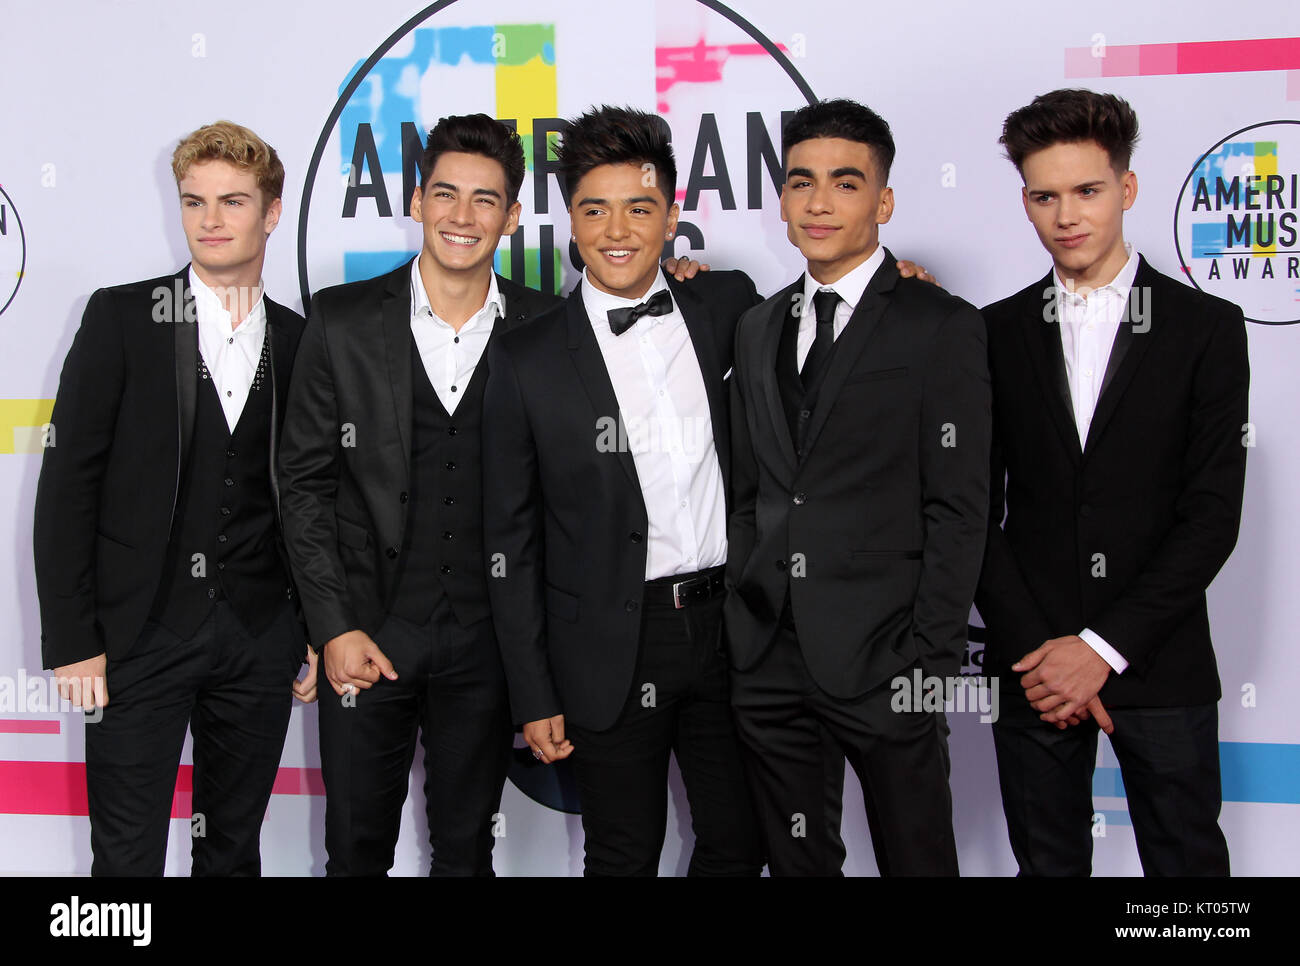 American Music Awards 2017 Arrivals held at the Microsoft Theater in Los Angeles, California  Featuring: Brady Tutton, Chance Perez, Drew Ramos, Sergio Calderon Jr., Michael Conor of ‘In Real Life’ Where: Los Angeles, California, United States When: 19 Nov 2017 Credit: Adriana M. Barraza/WENN.com Stock Photo